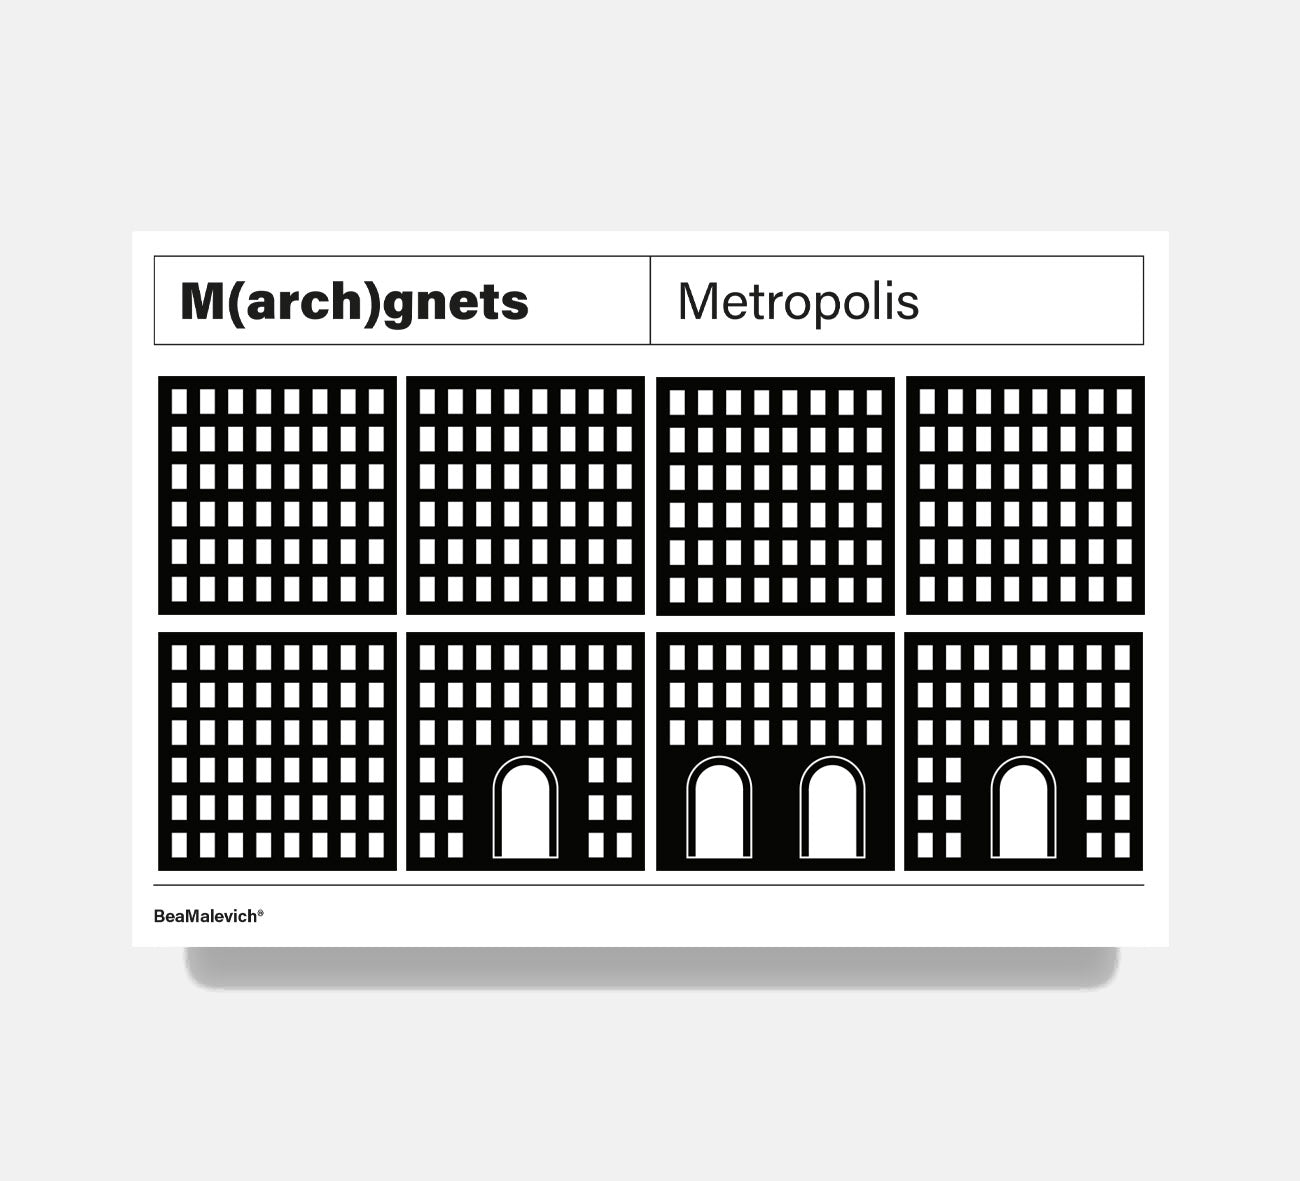 Metropolis Façade Magnets  beamalevich architecture gift design gift art gift